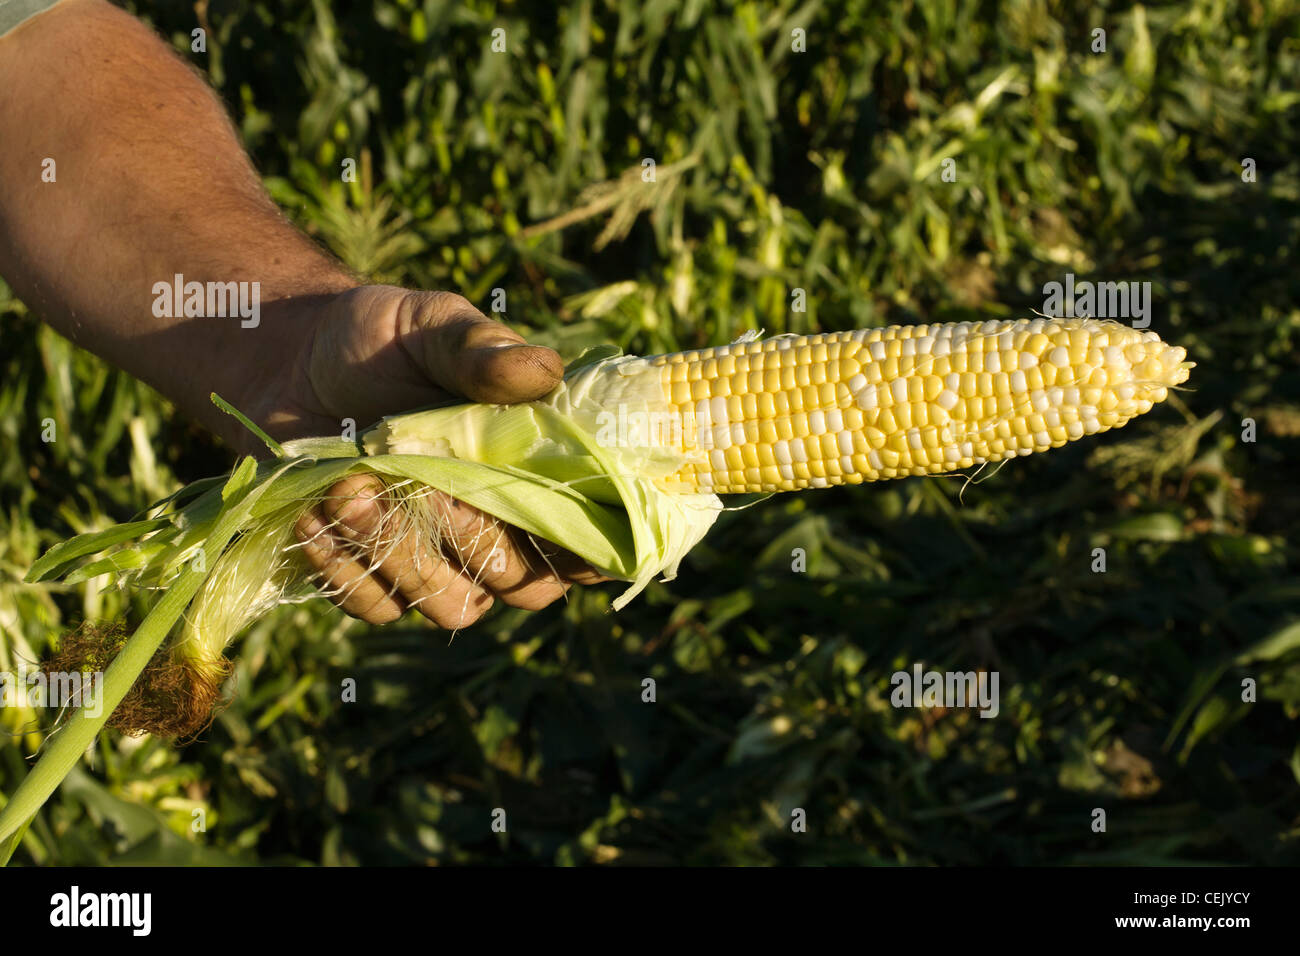 Mature bi pics A Farmers Hand Holds An Ear Of Mature Bi Colored Sweet Corn With The Husk Removed At A Local Family Produce Farm Rhode Island Stock Photo Alamy